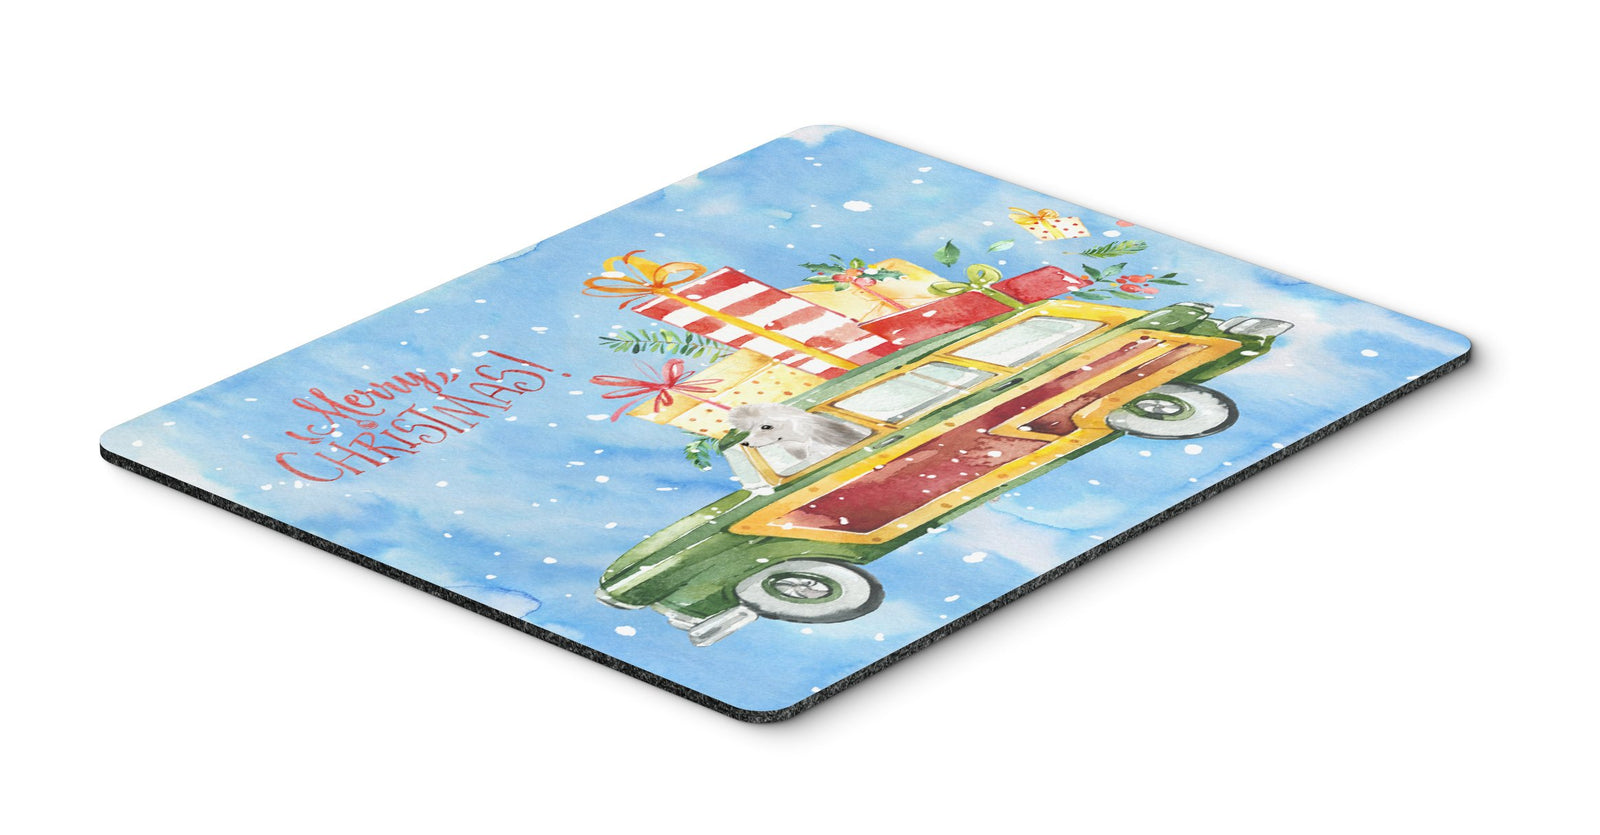 Merry Christmas White Poodle Mouse Pad, Hot Pad or Trivet CK2466MP by Caroline's Treasures